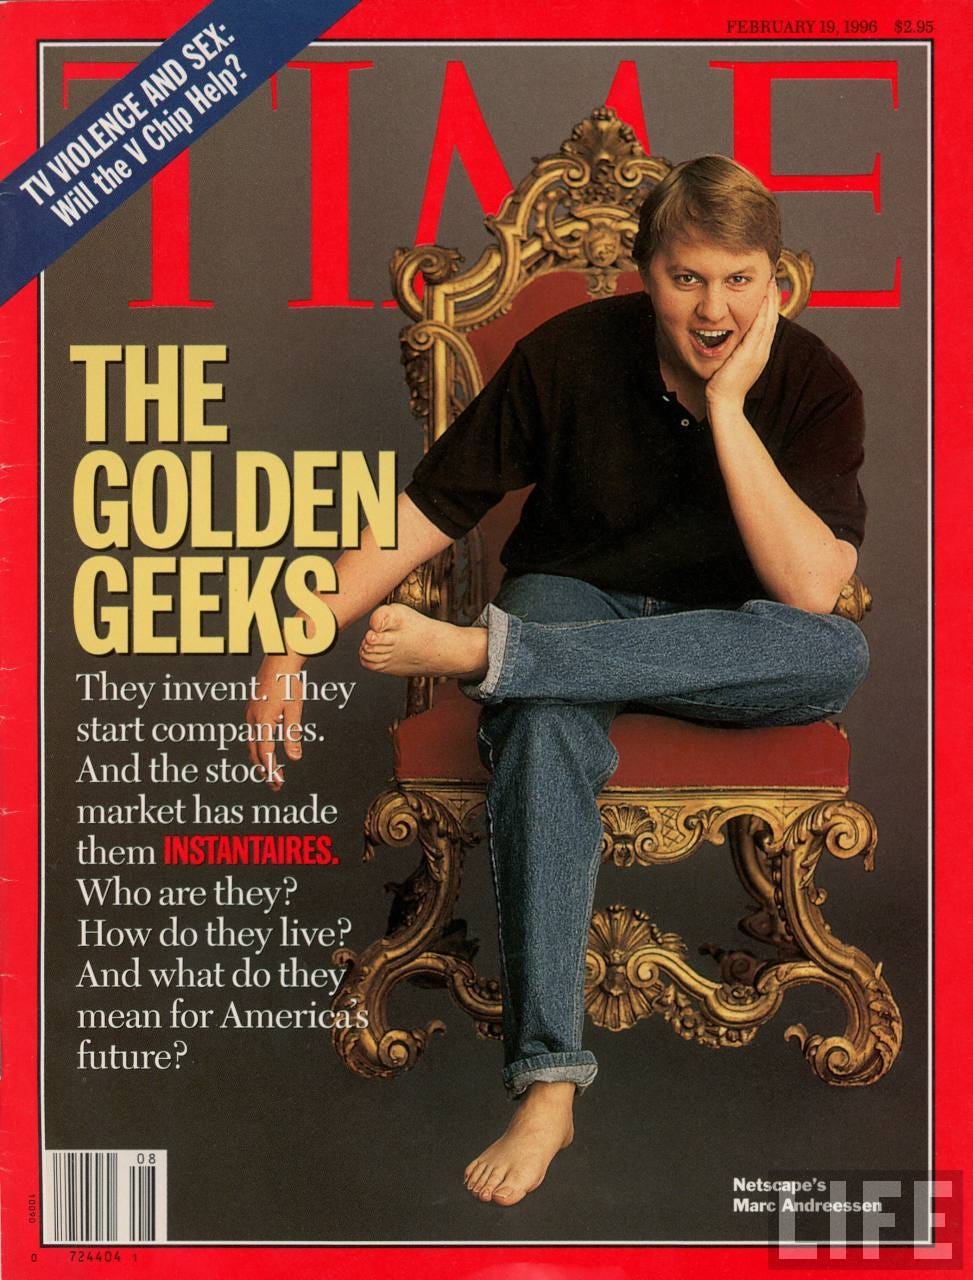 Bonus: Why Marc Andreessen is a Key Character in My Book